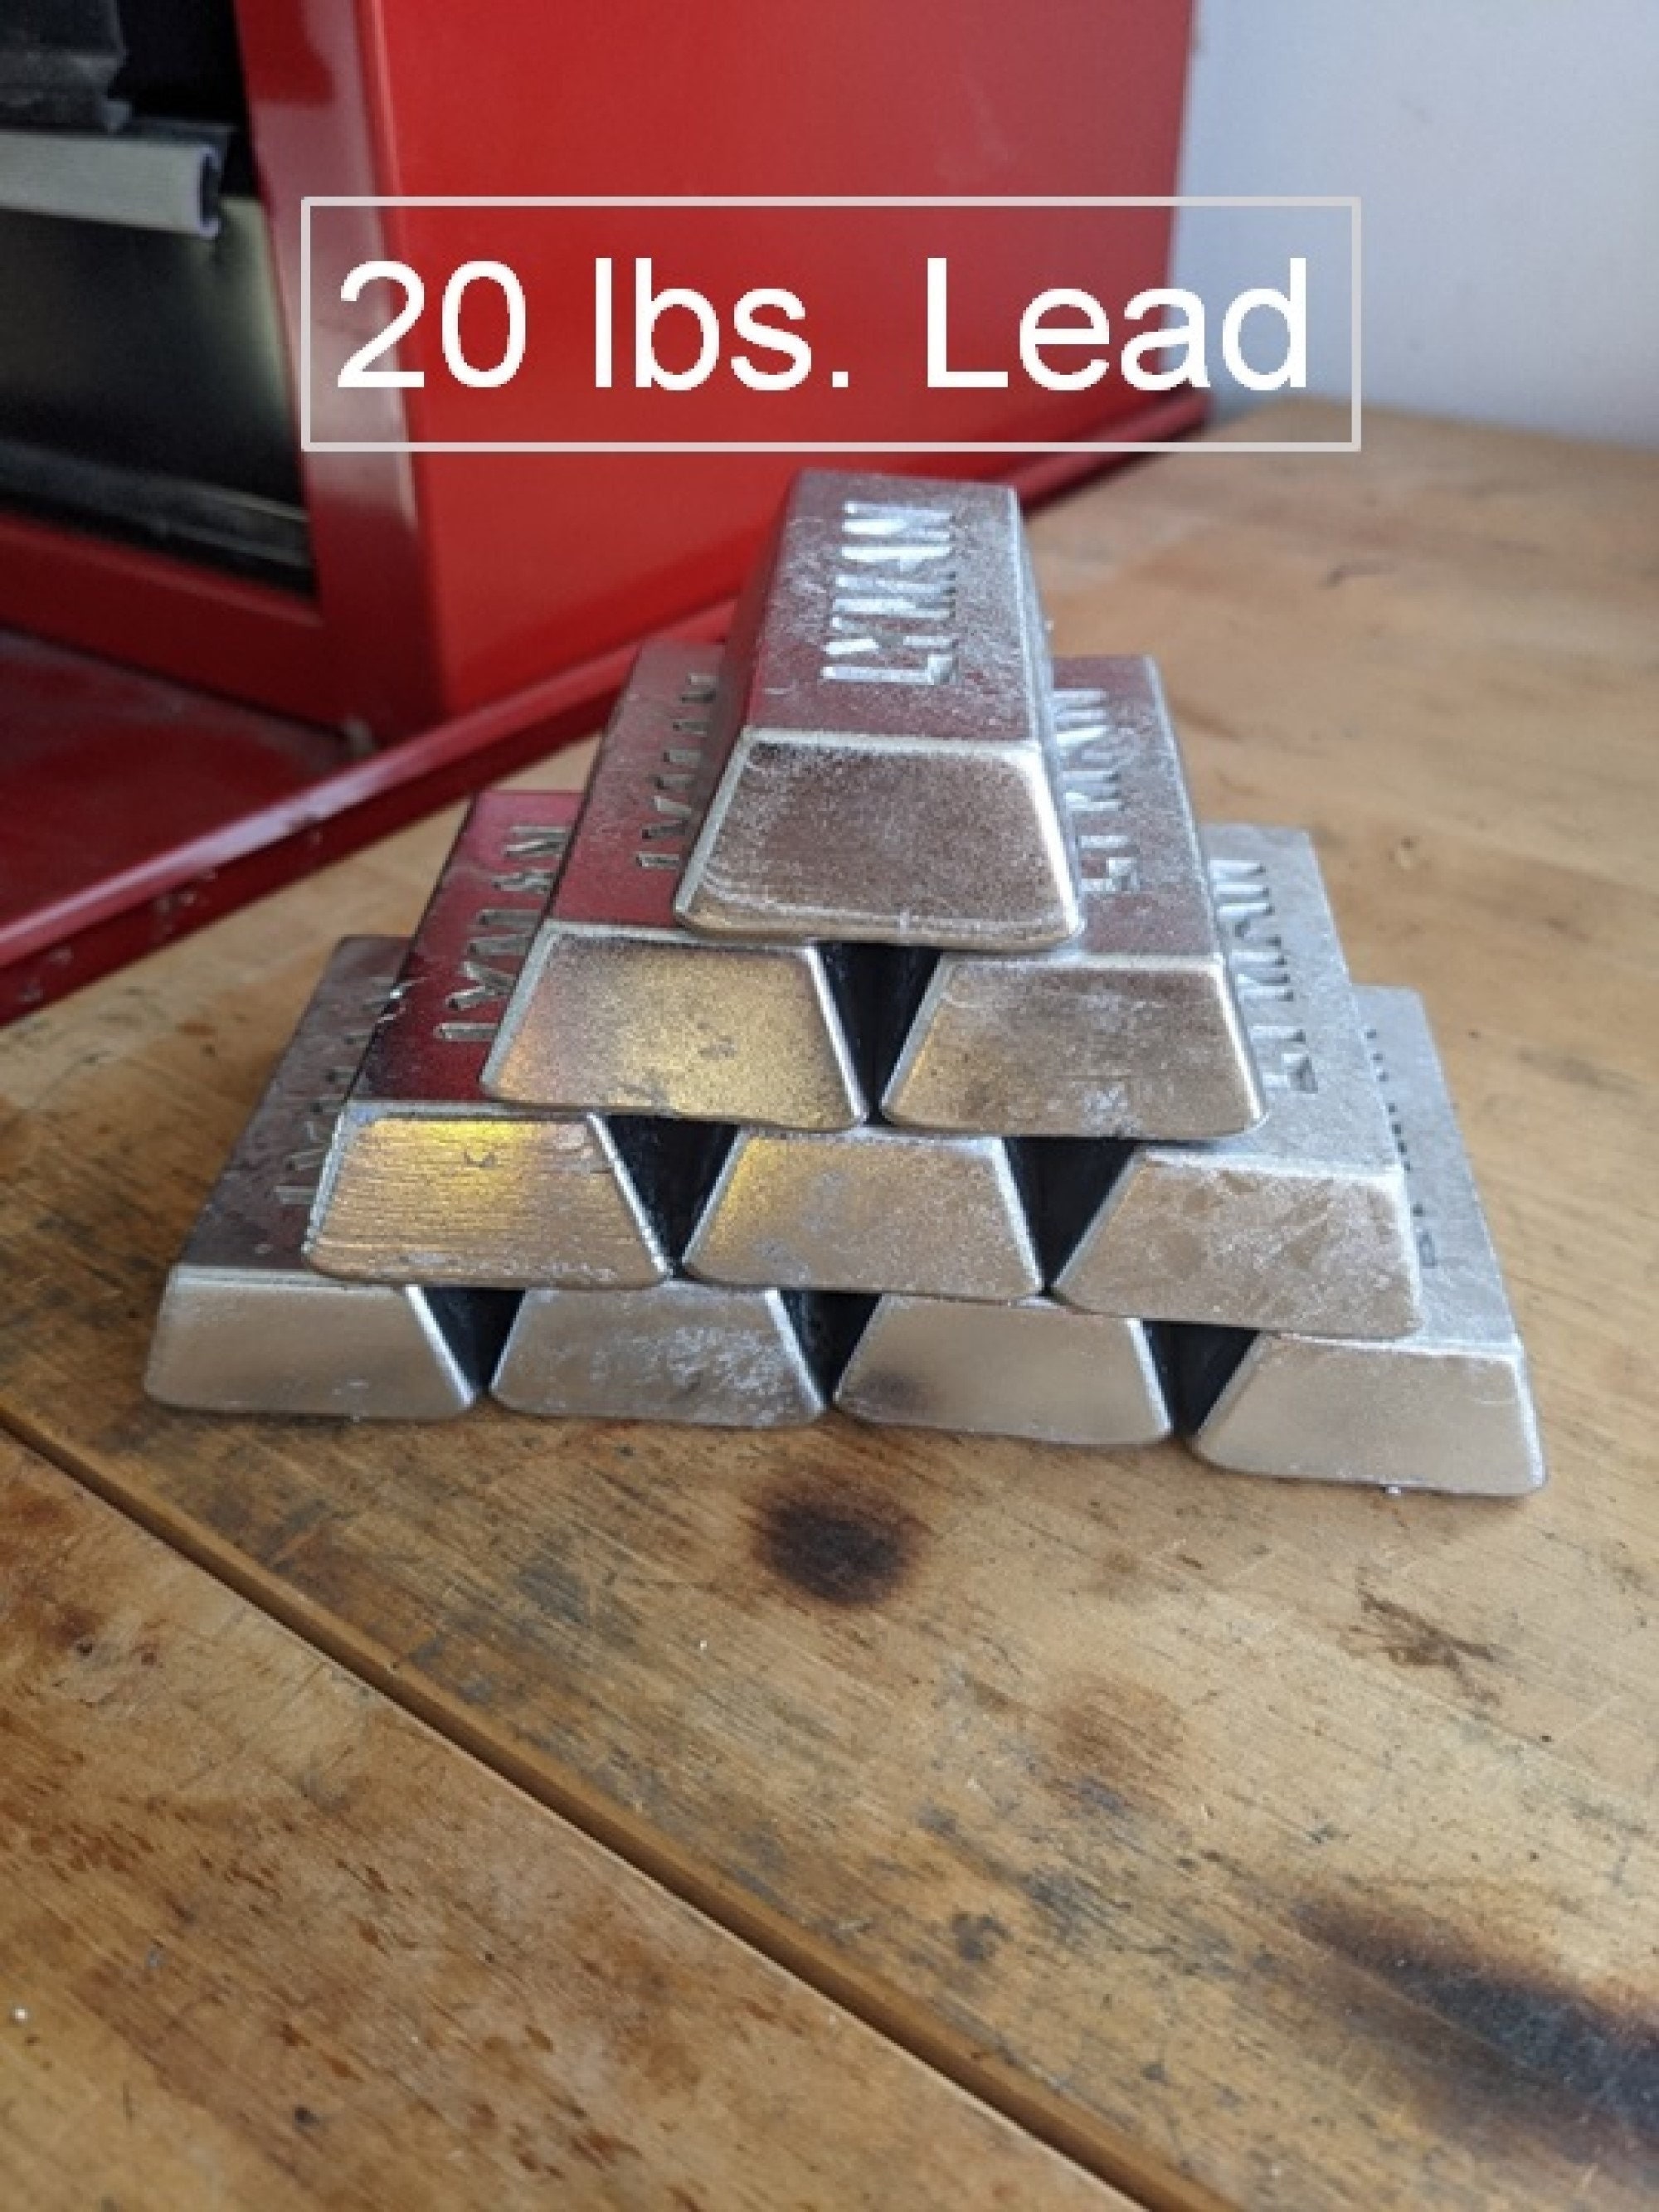 18 lbs  Lead Ingots for casting sinkers or bullets.  